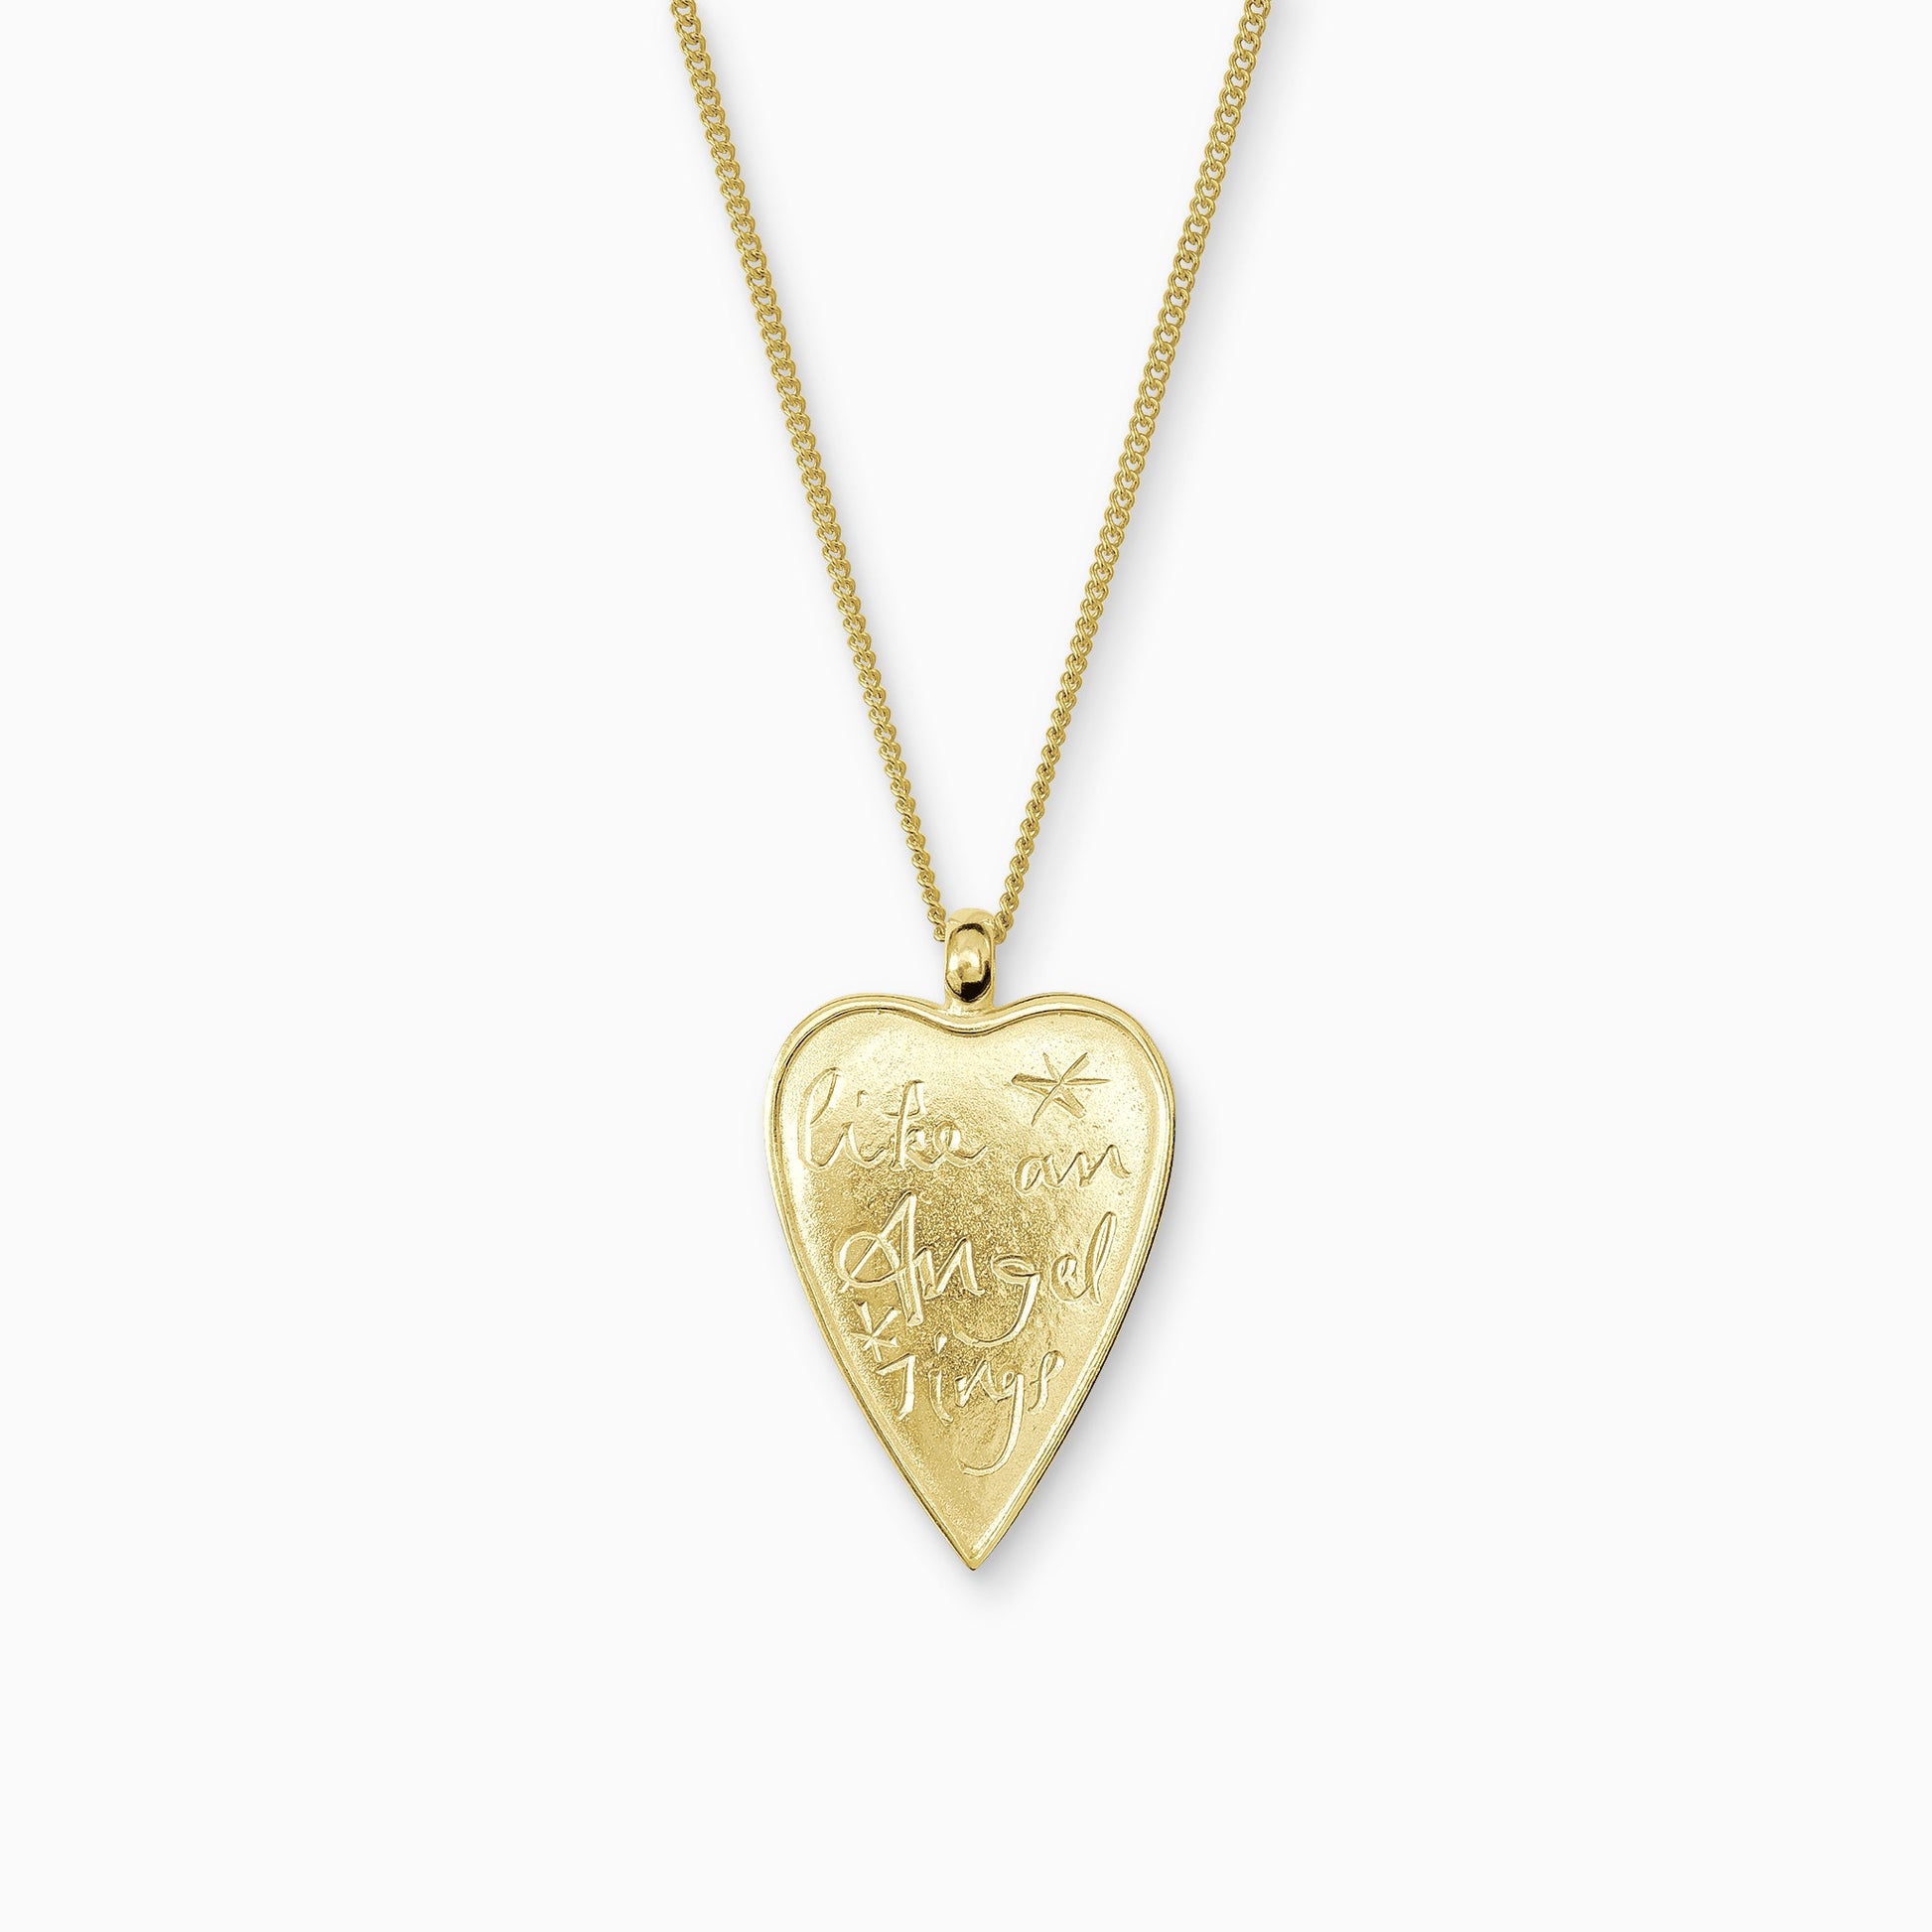 18ct Fairtrade yellow gold shaped charm, 38cm x 24mm on a 45cm fine curb chain. Like an Angel Sings is inscribed in a handwritten script on the front of the pendant.